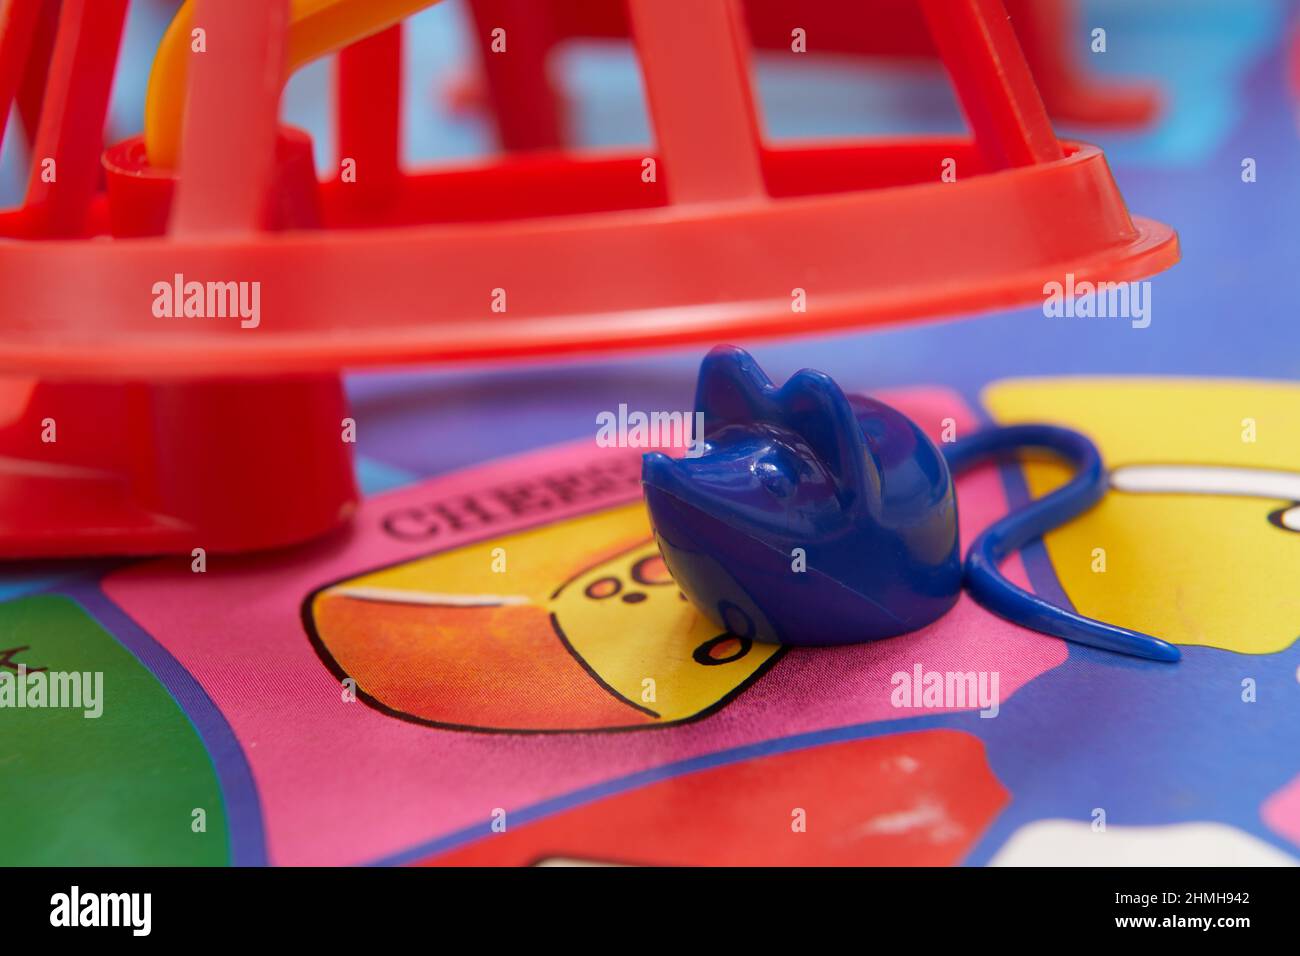 https://c8.alamy.com/comp/2HMH942/close-up-photograph-of-playing-pieces-on-a-mouse-trap-board-game-2HMH942.jpg